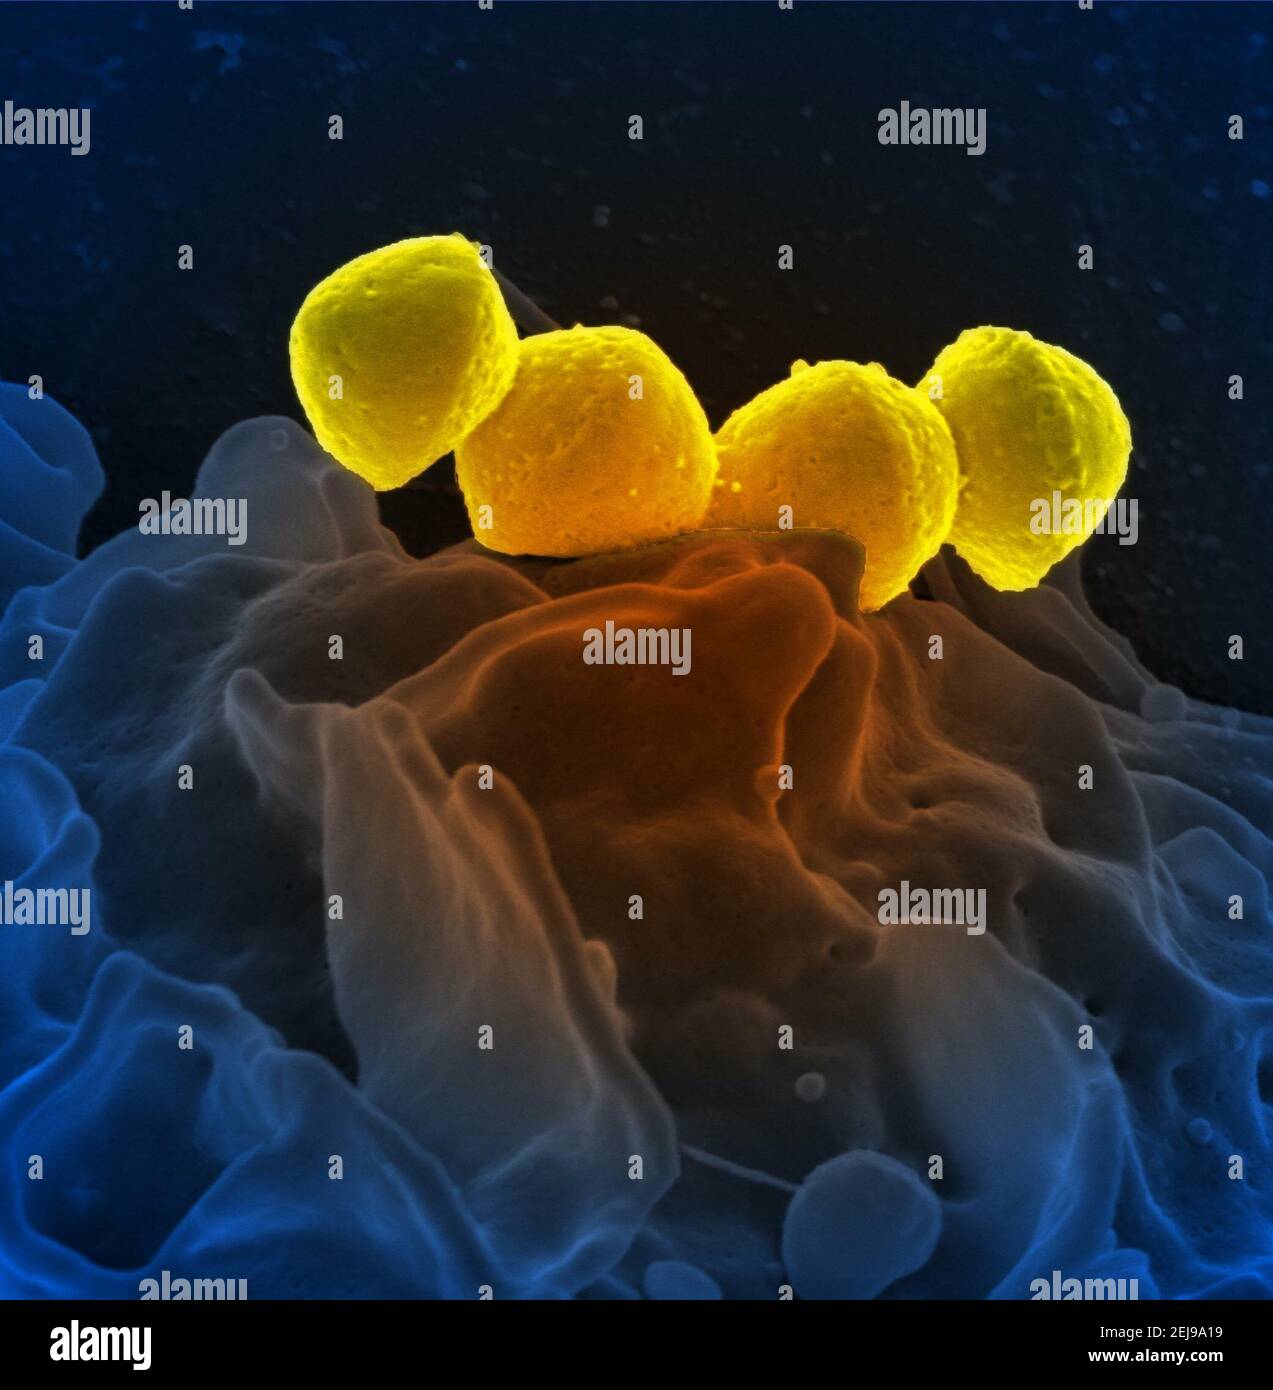 Group a streptococcus bacteria on human neutrophil Stock Photo